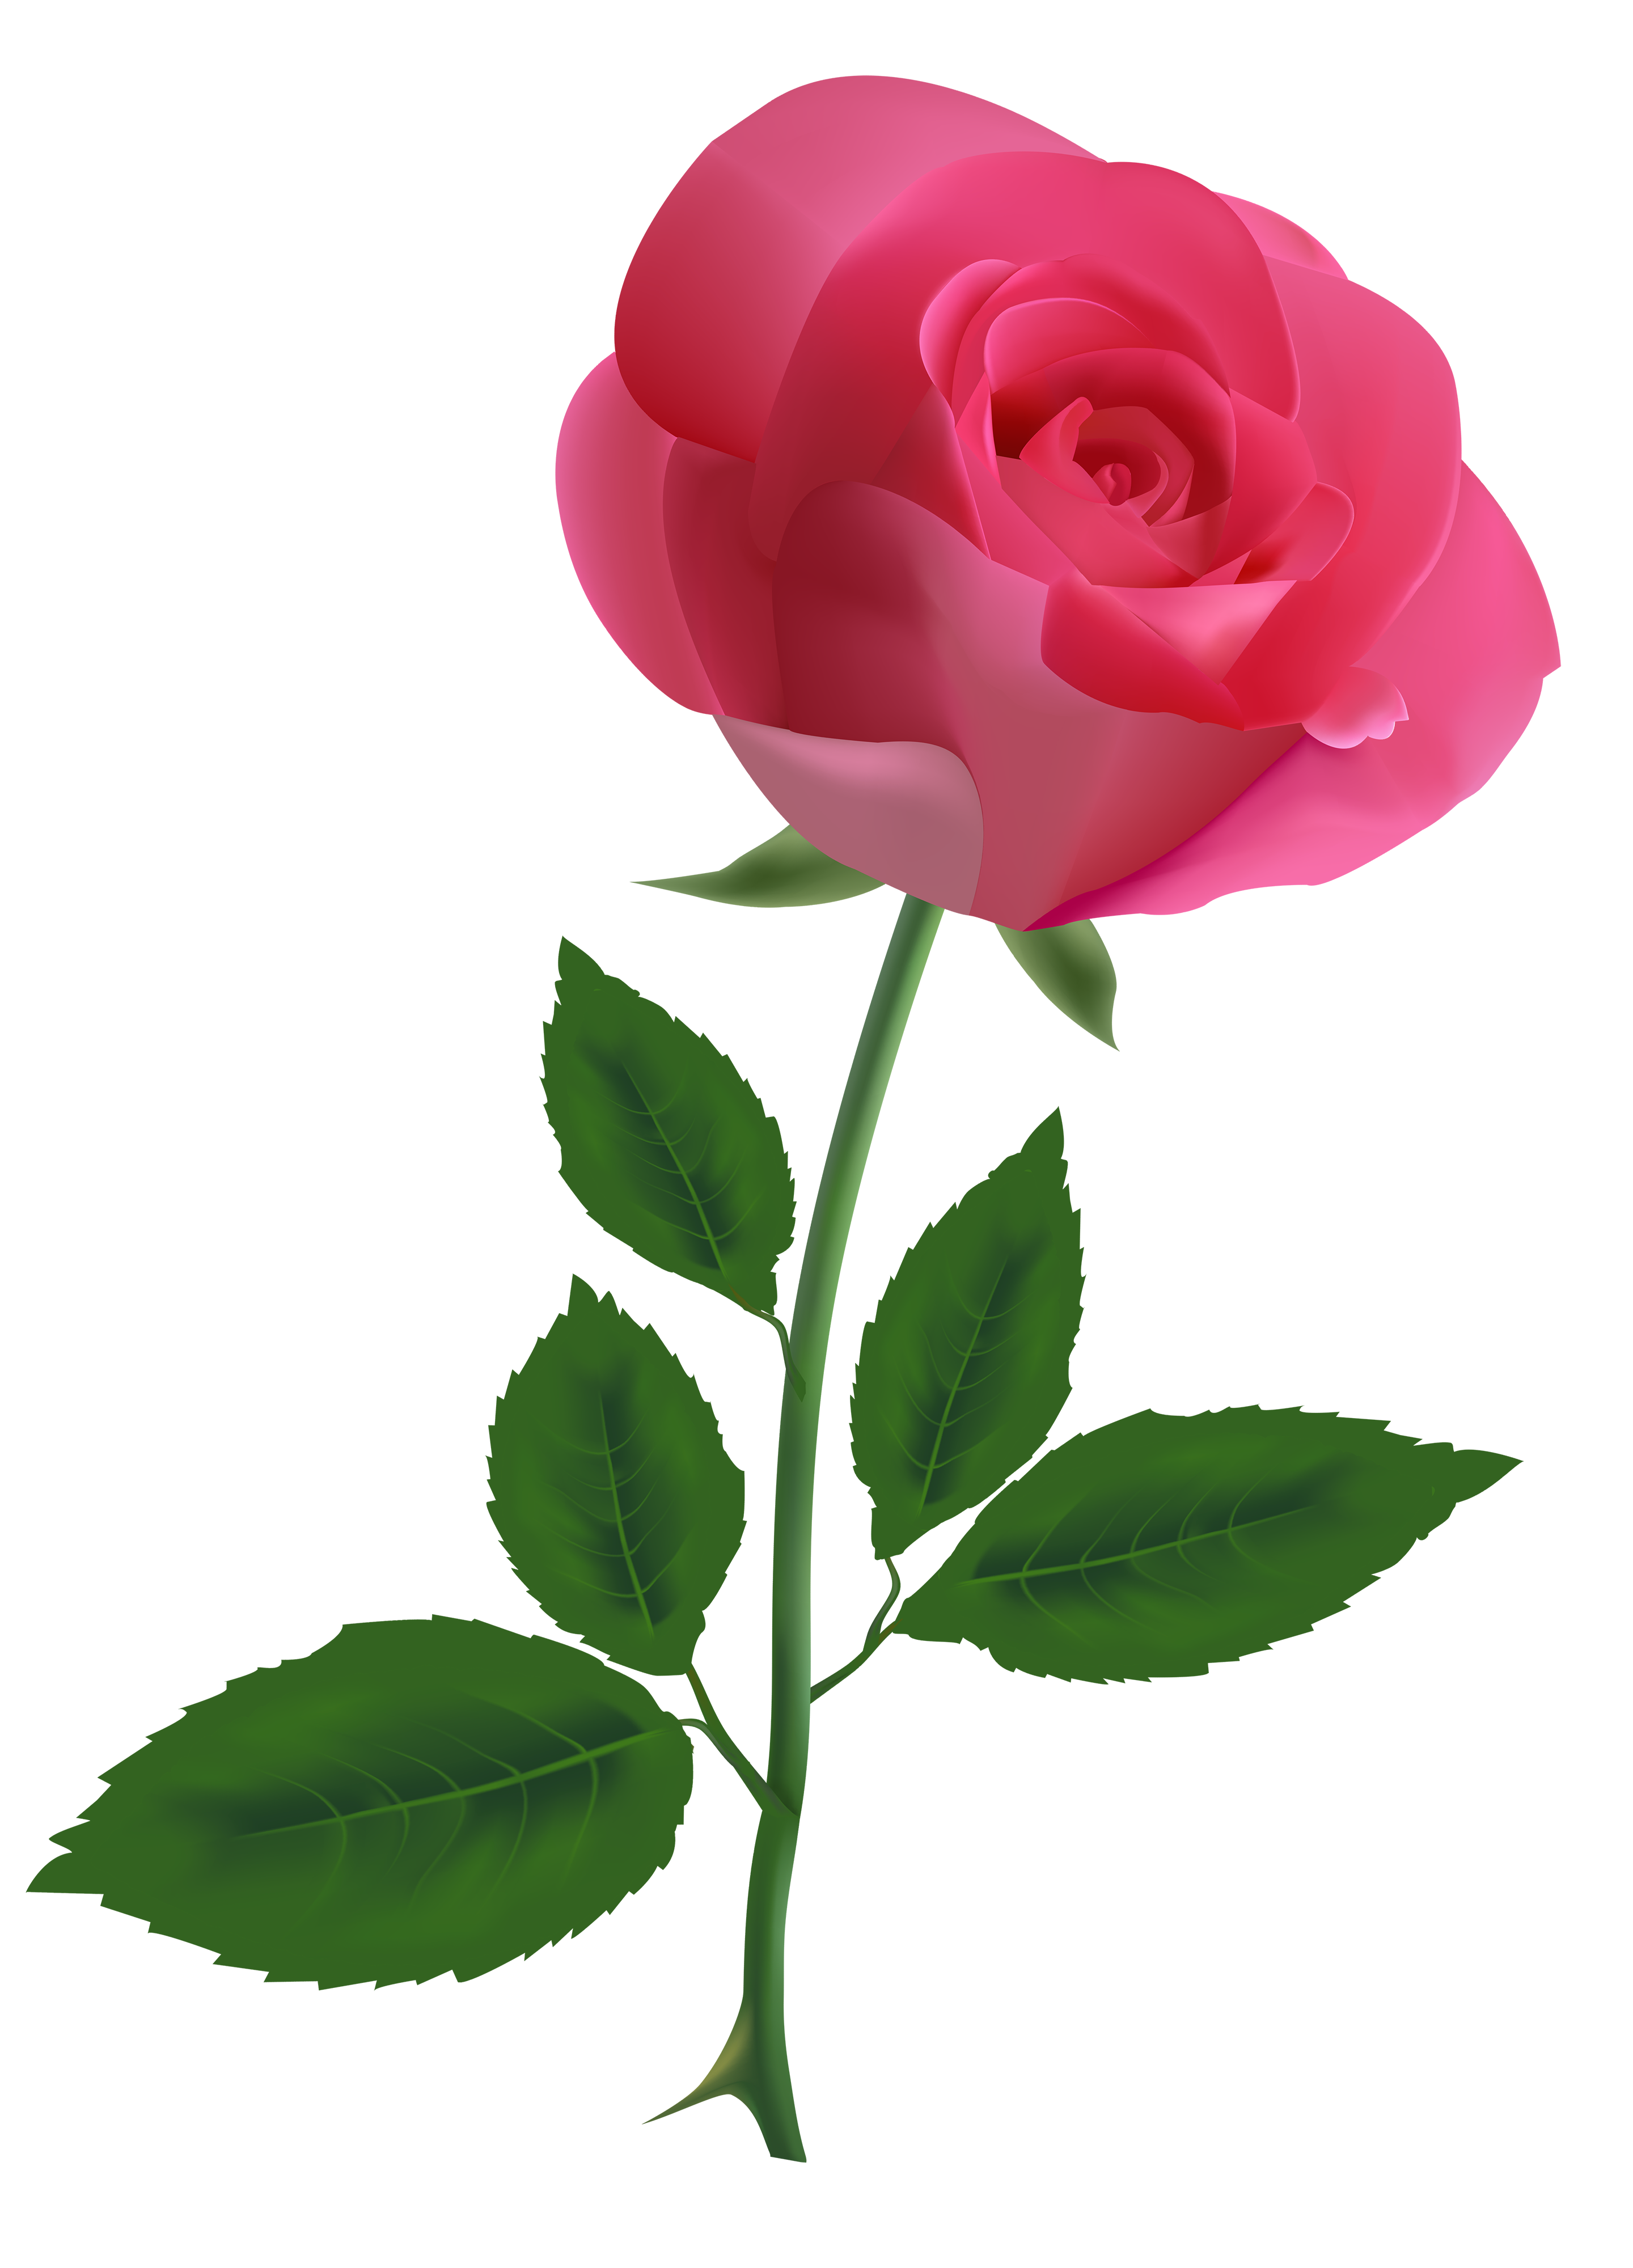 Pink Rose Clipart PNG Image - Best WEB Clipart